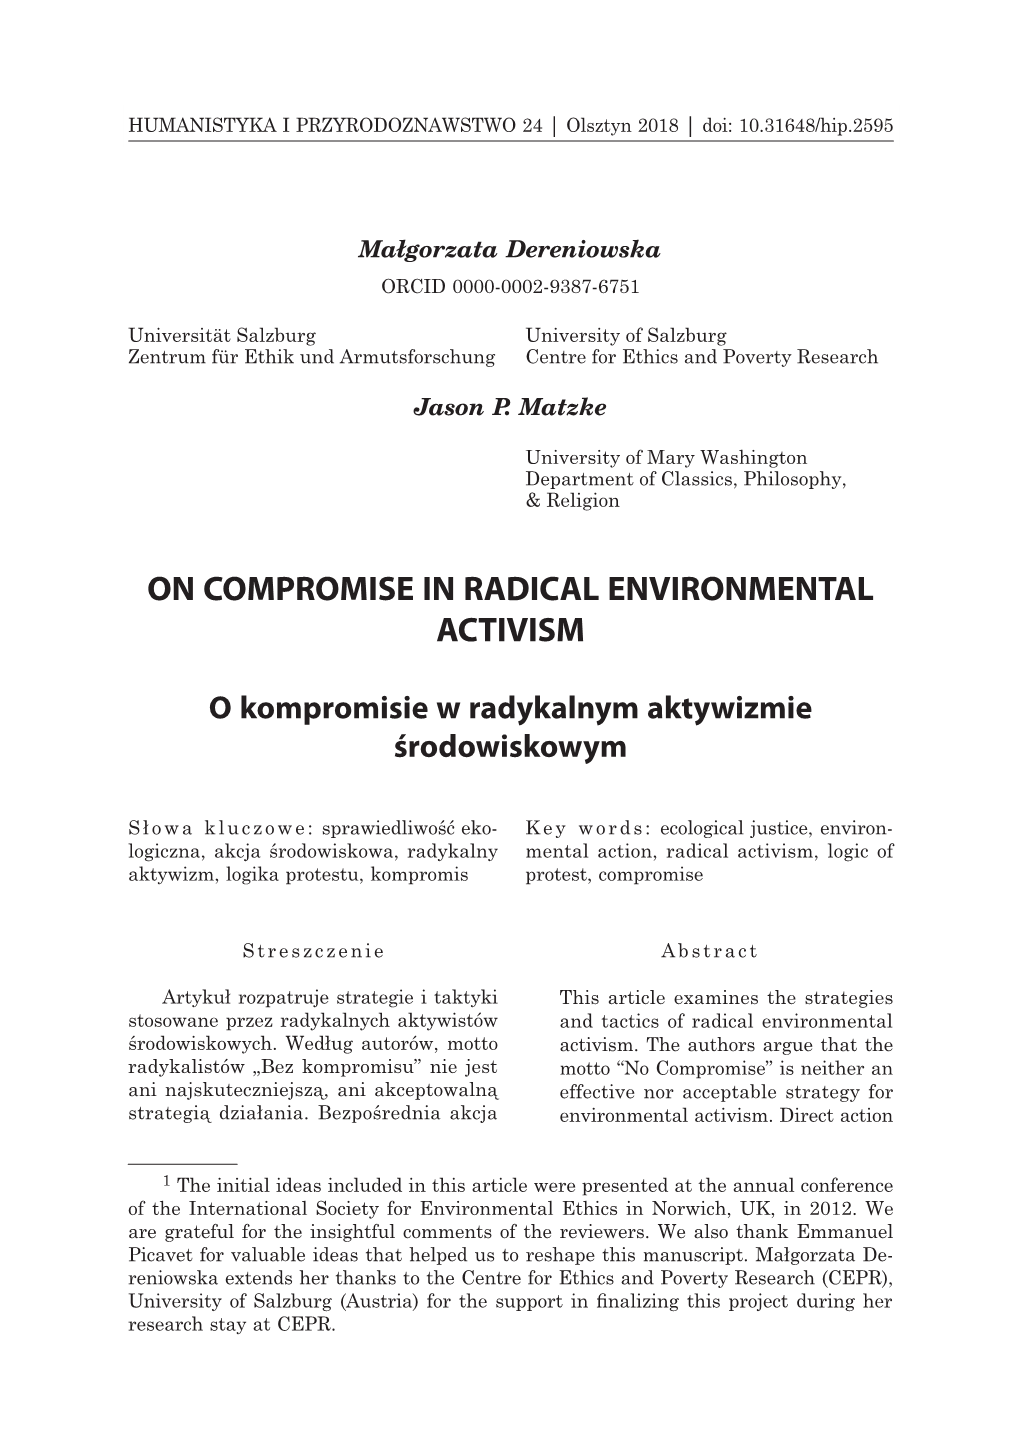 On Compromise in Radical Environmental Activism